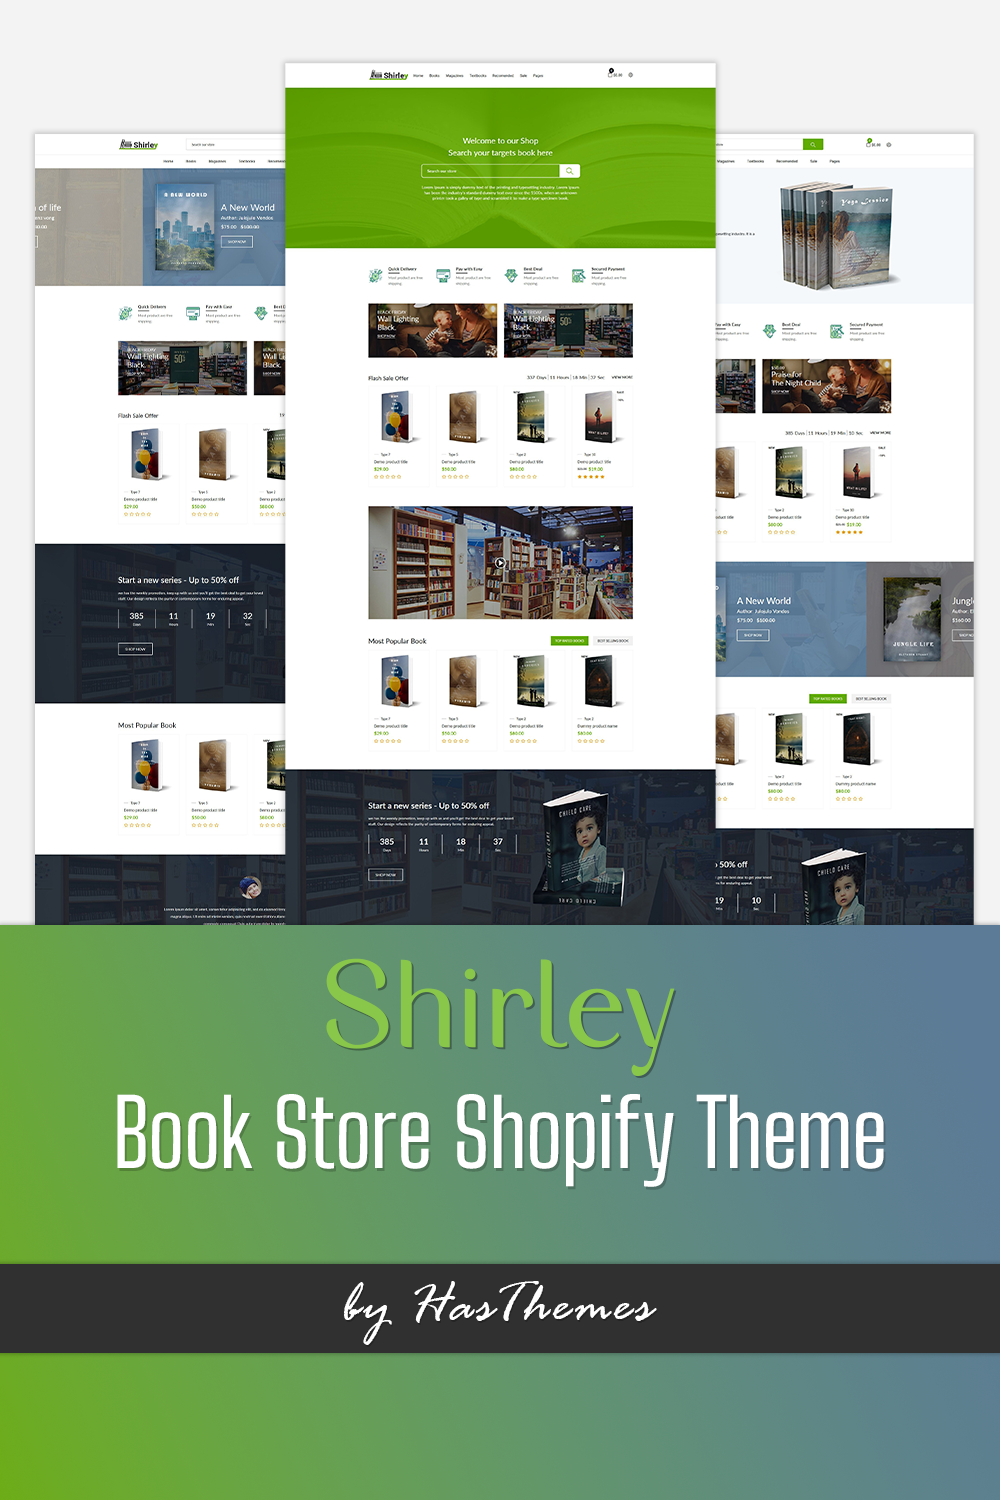 Book store shopify theme – shirley images of pinterest.